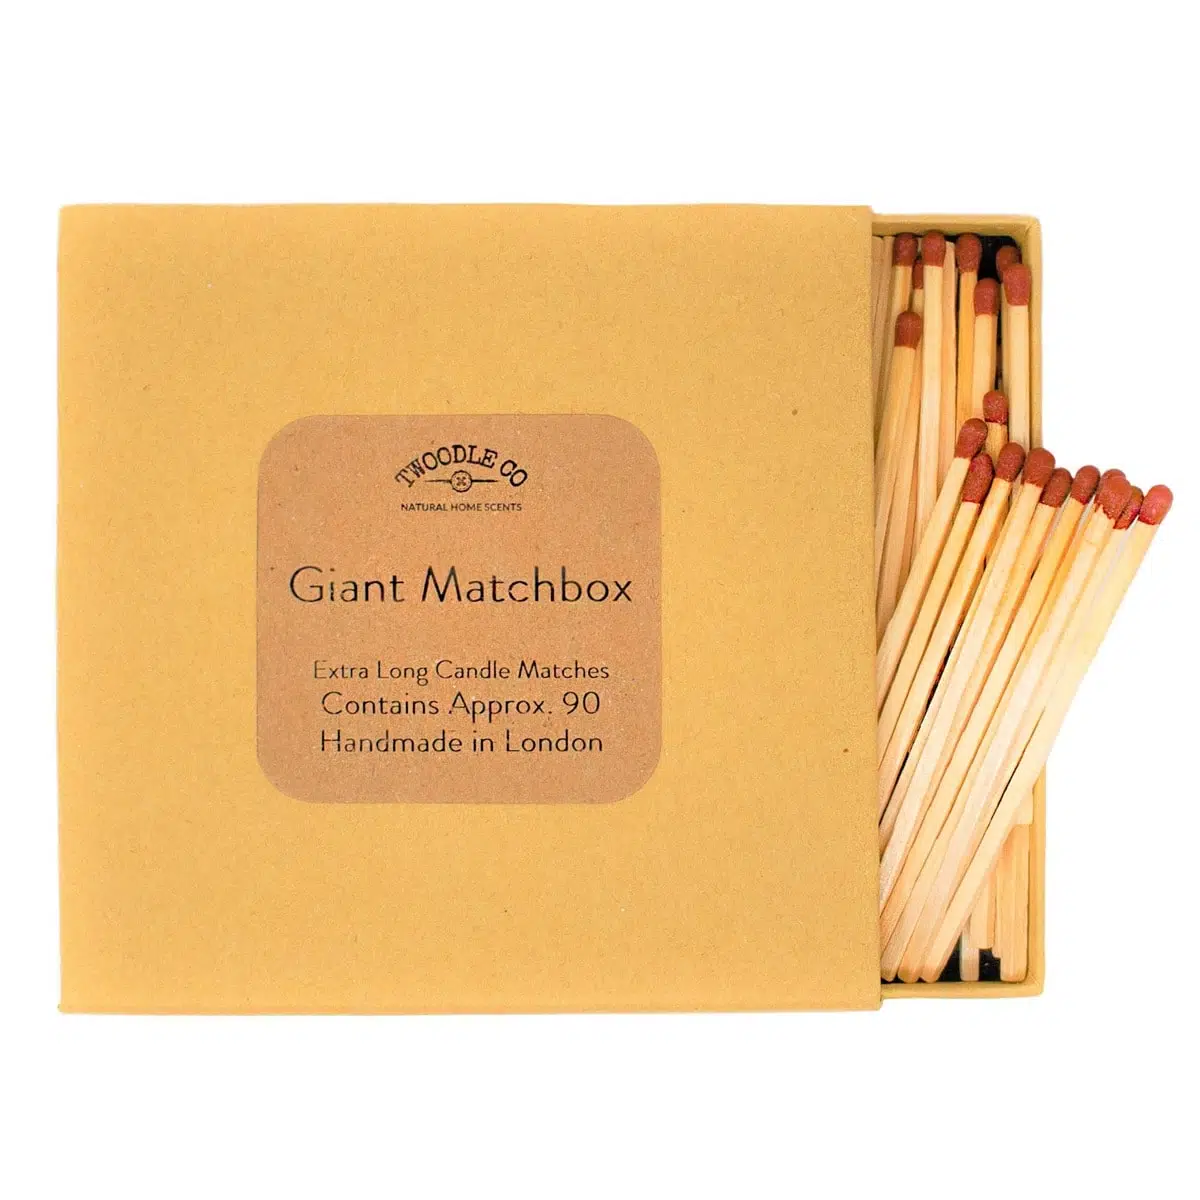 Giant match box - extra long candle matches by Twoodle Co Natural Home Scents-1